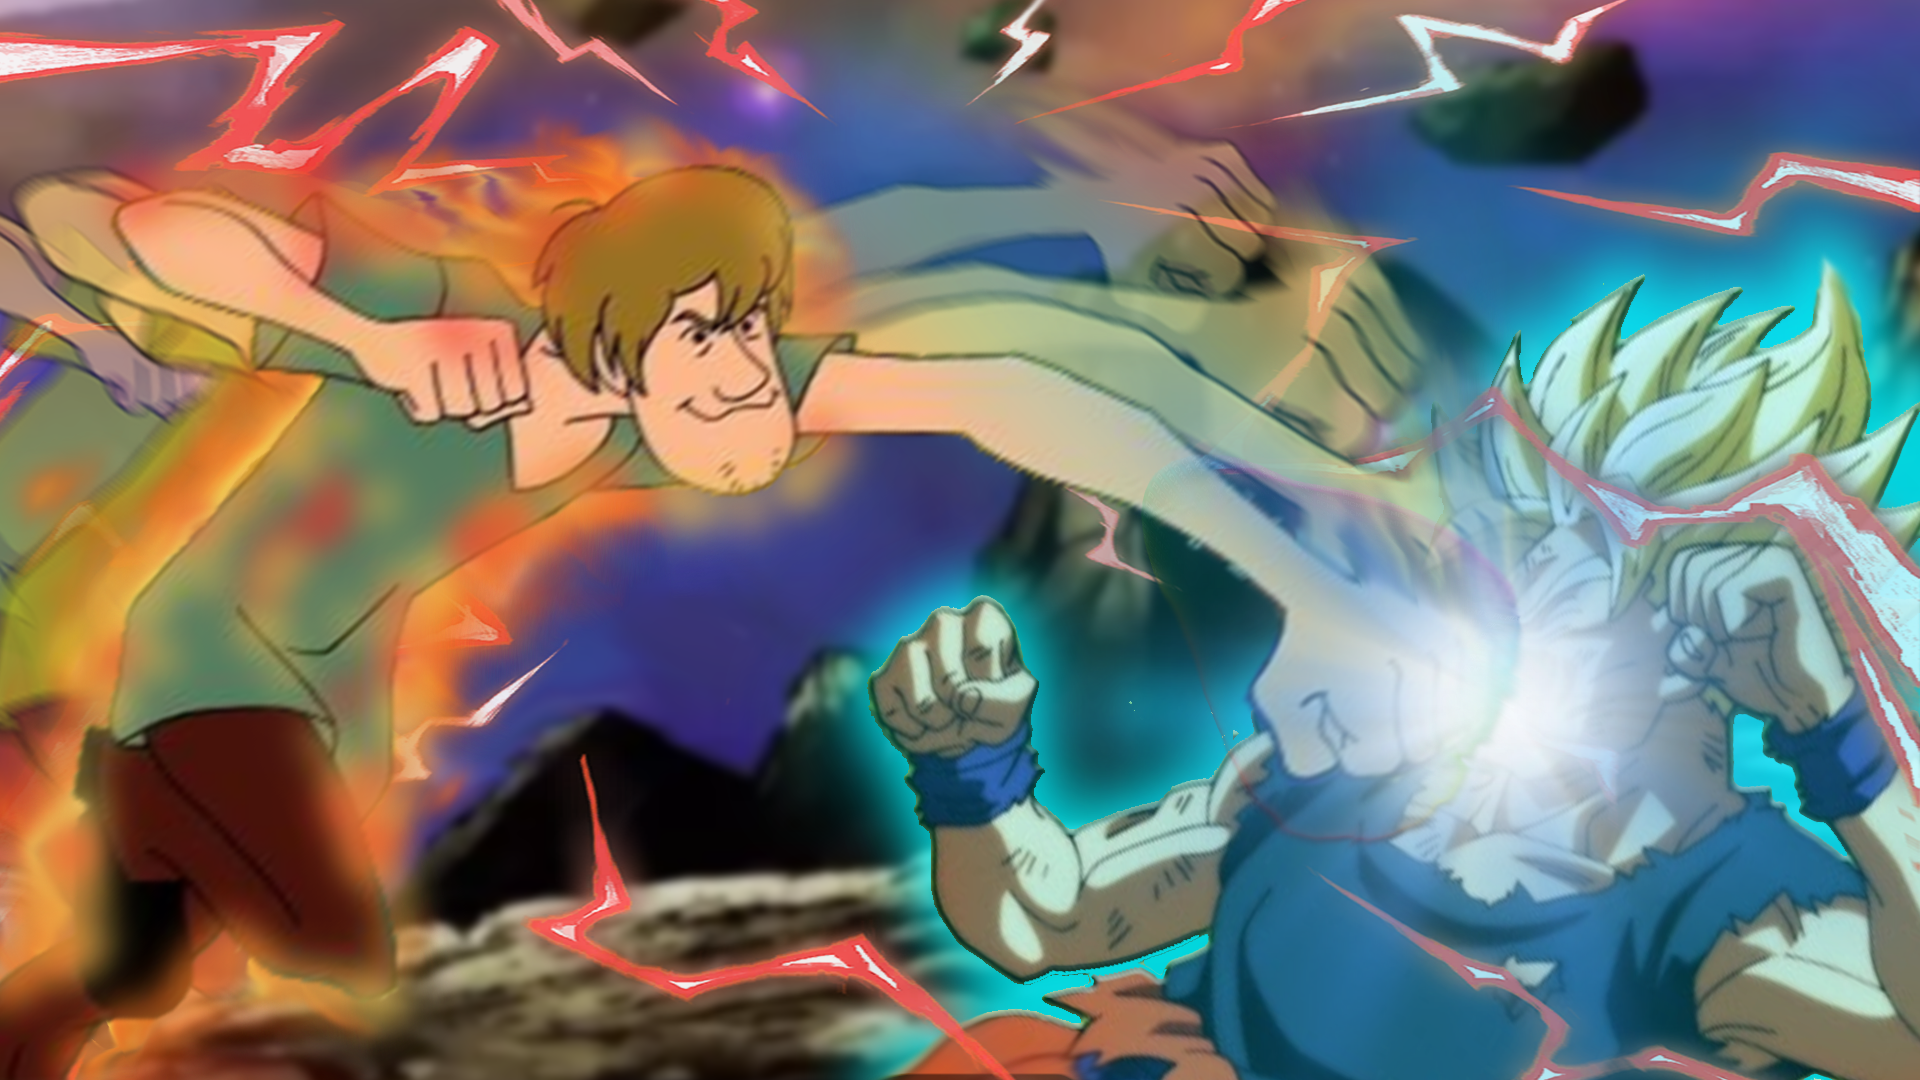 Like, Dude, You're no match for my Shaggy Fist Technique!